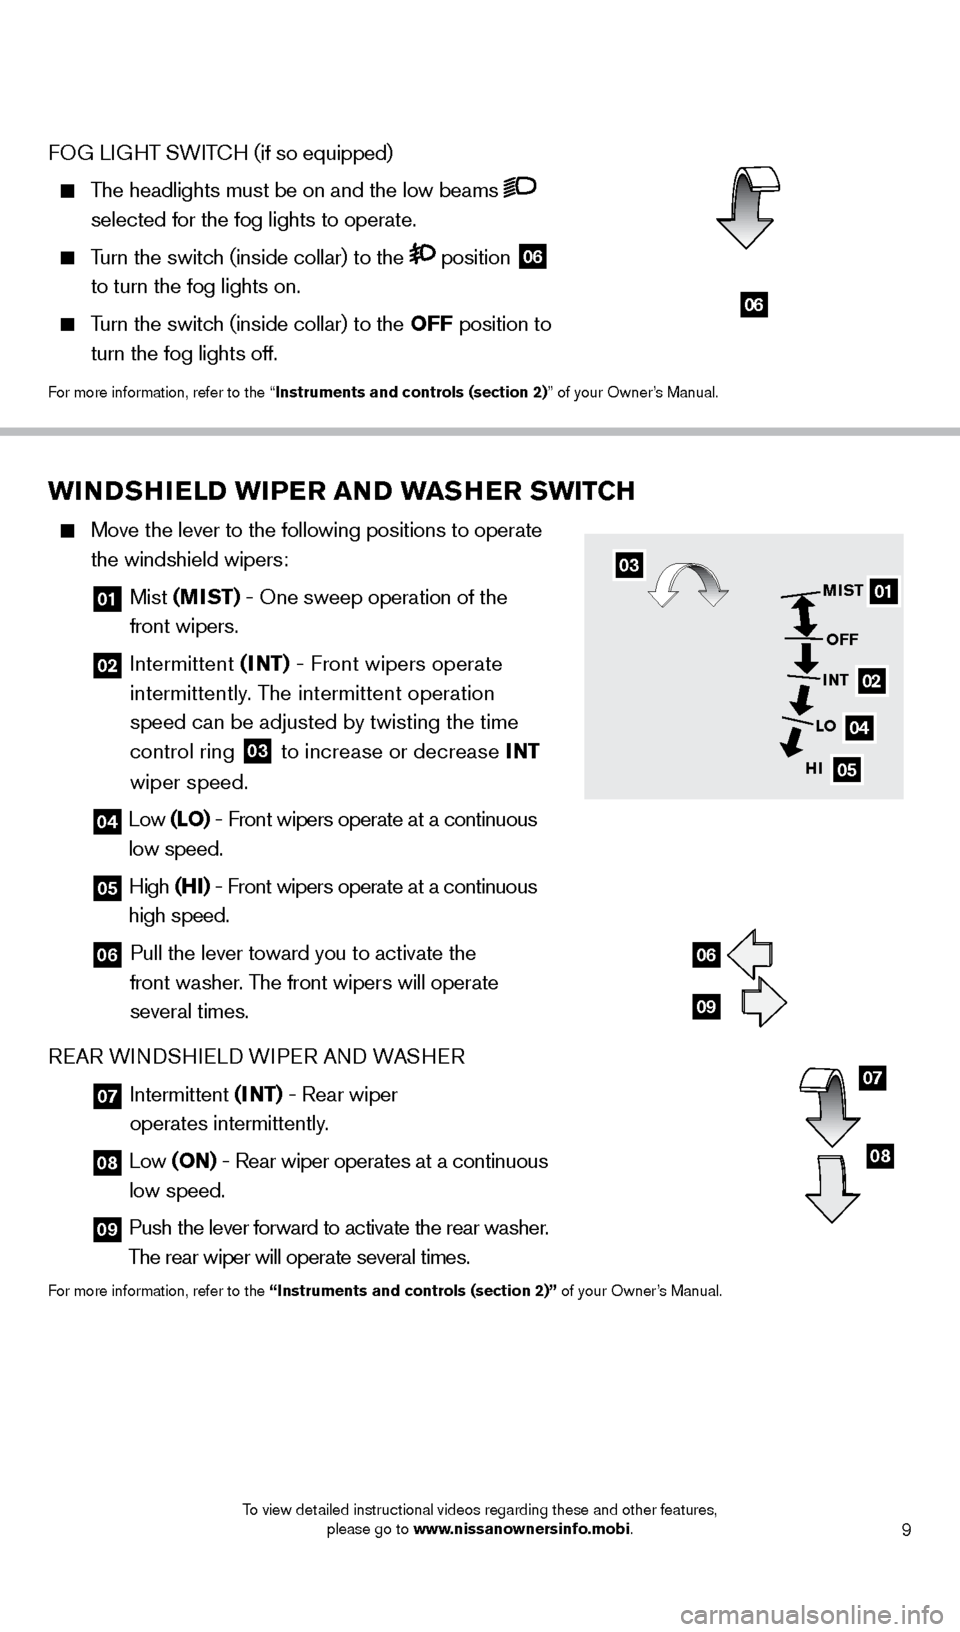 NISSAN CUBE 2014 3.G Quick Reference Guide 9
WINDSHIELD WIPER AND WASHER SWITCH
   Move the lever to the following positions to operate  
the windshield wipers: 
  01   Mist  (MIST) - One sweep operation of the   
front wipers.
  02   Intermit